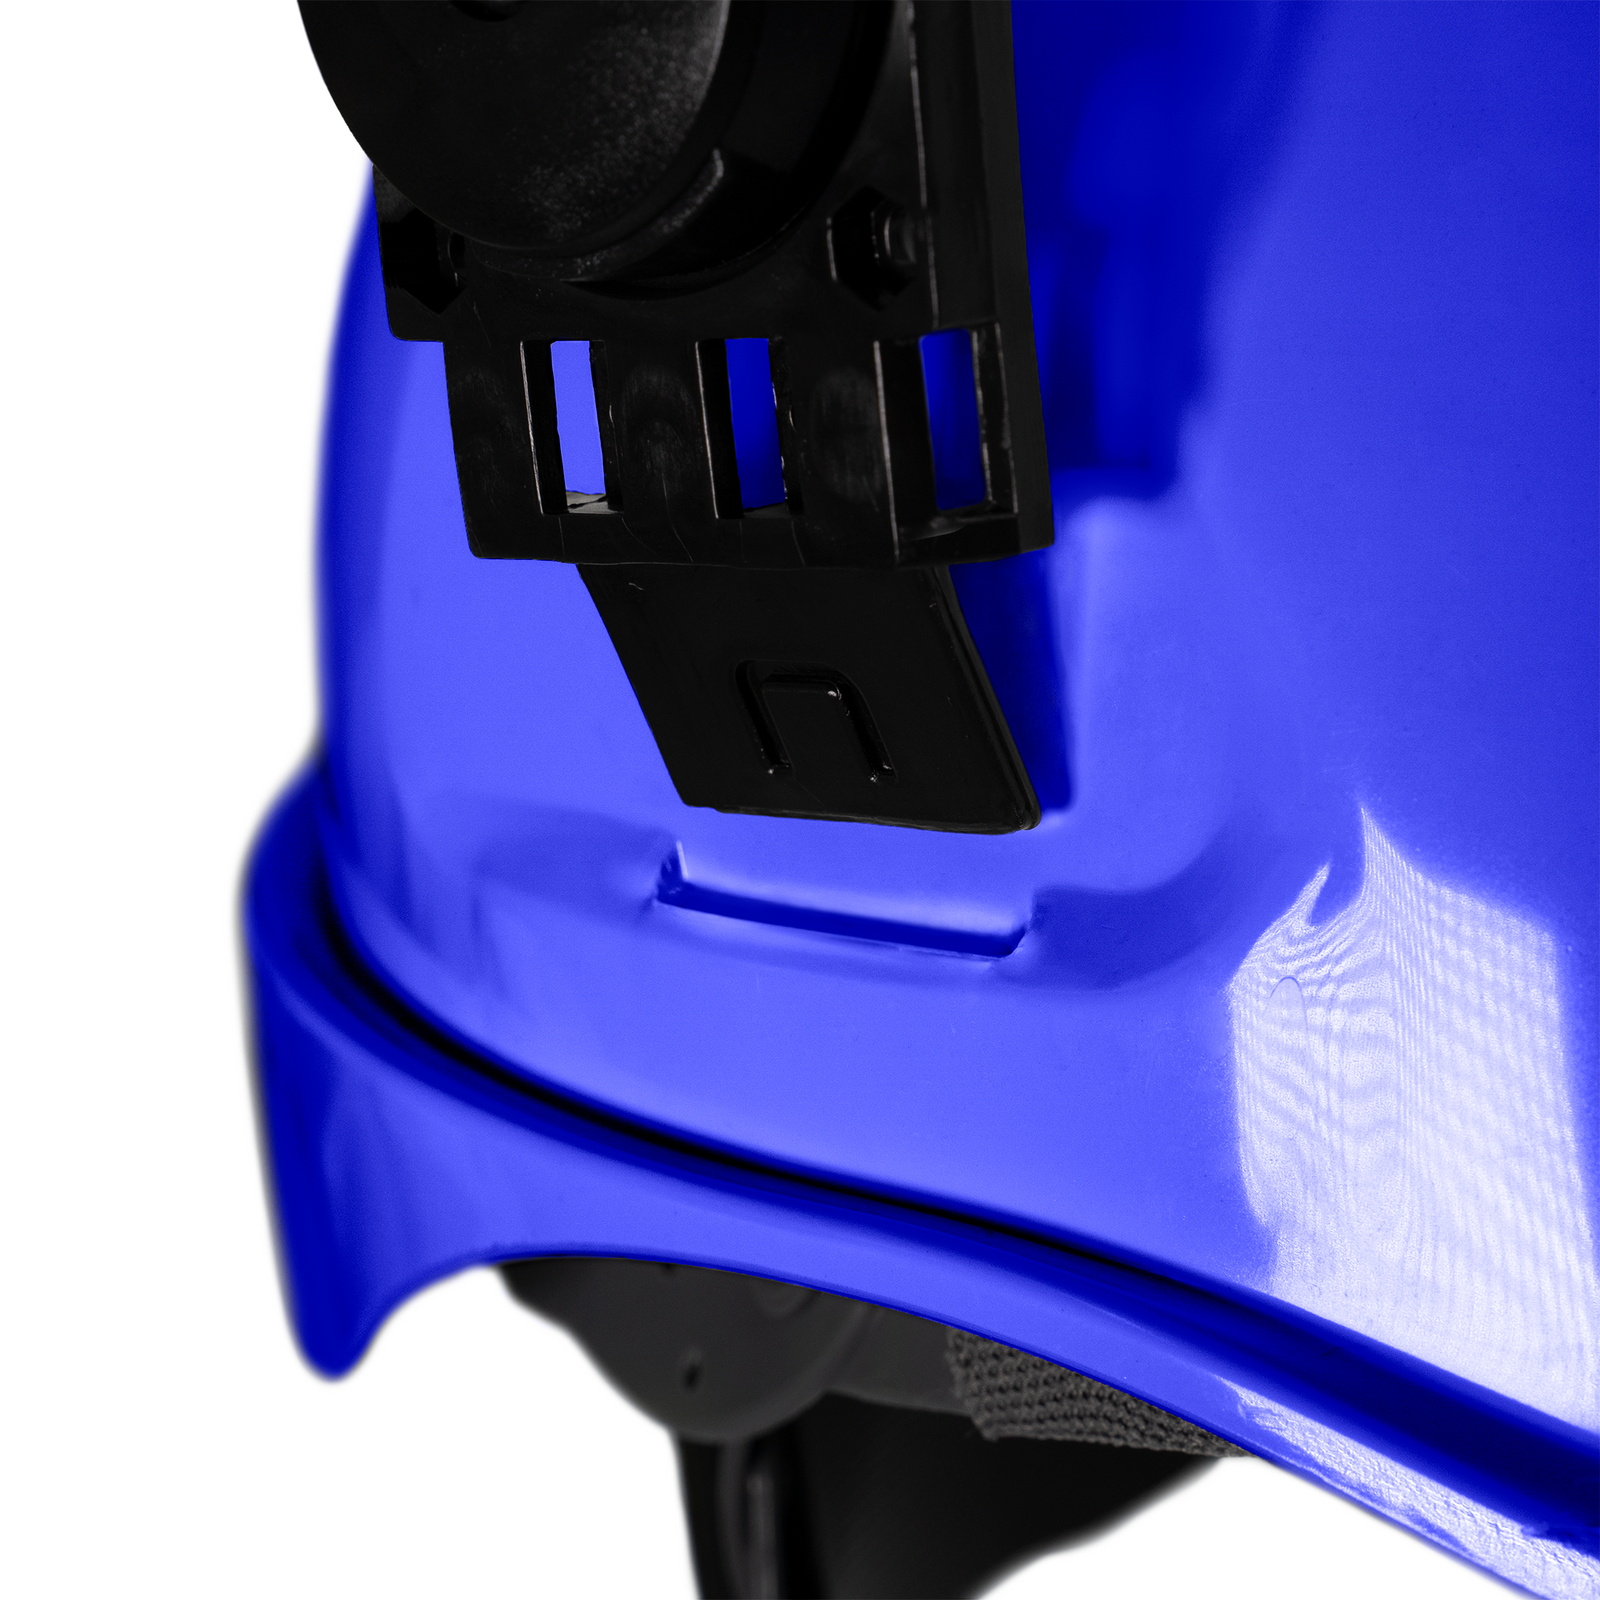 Close-up of a blue hard hat with universal slots to mount earmuffs, face shields and accessories